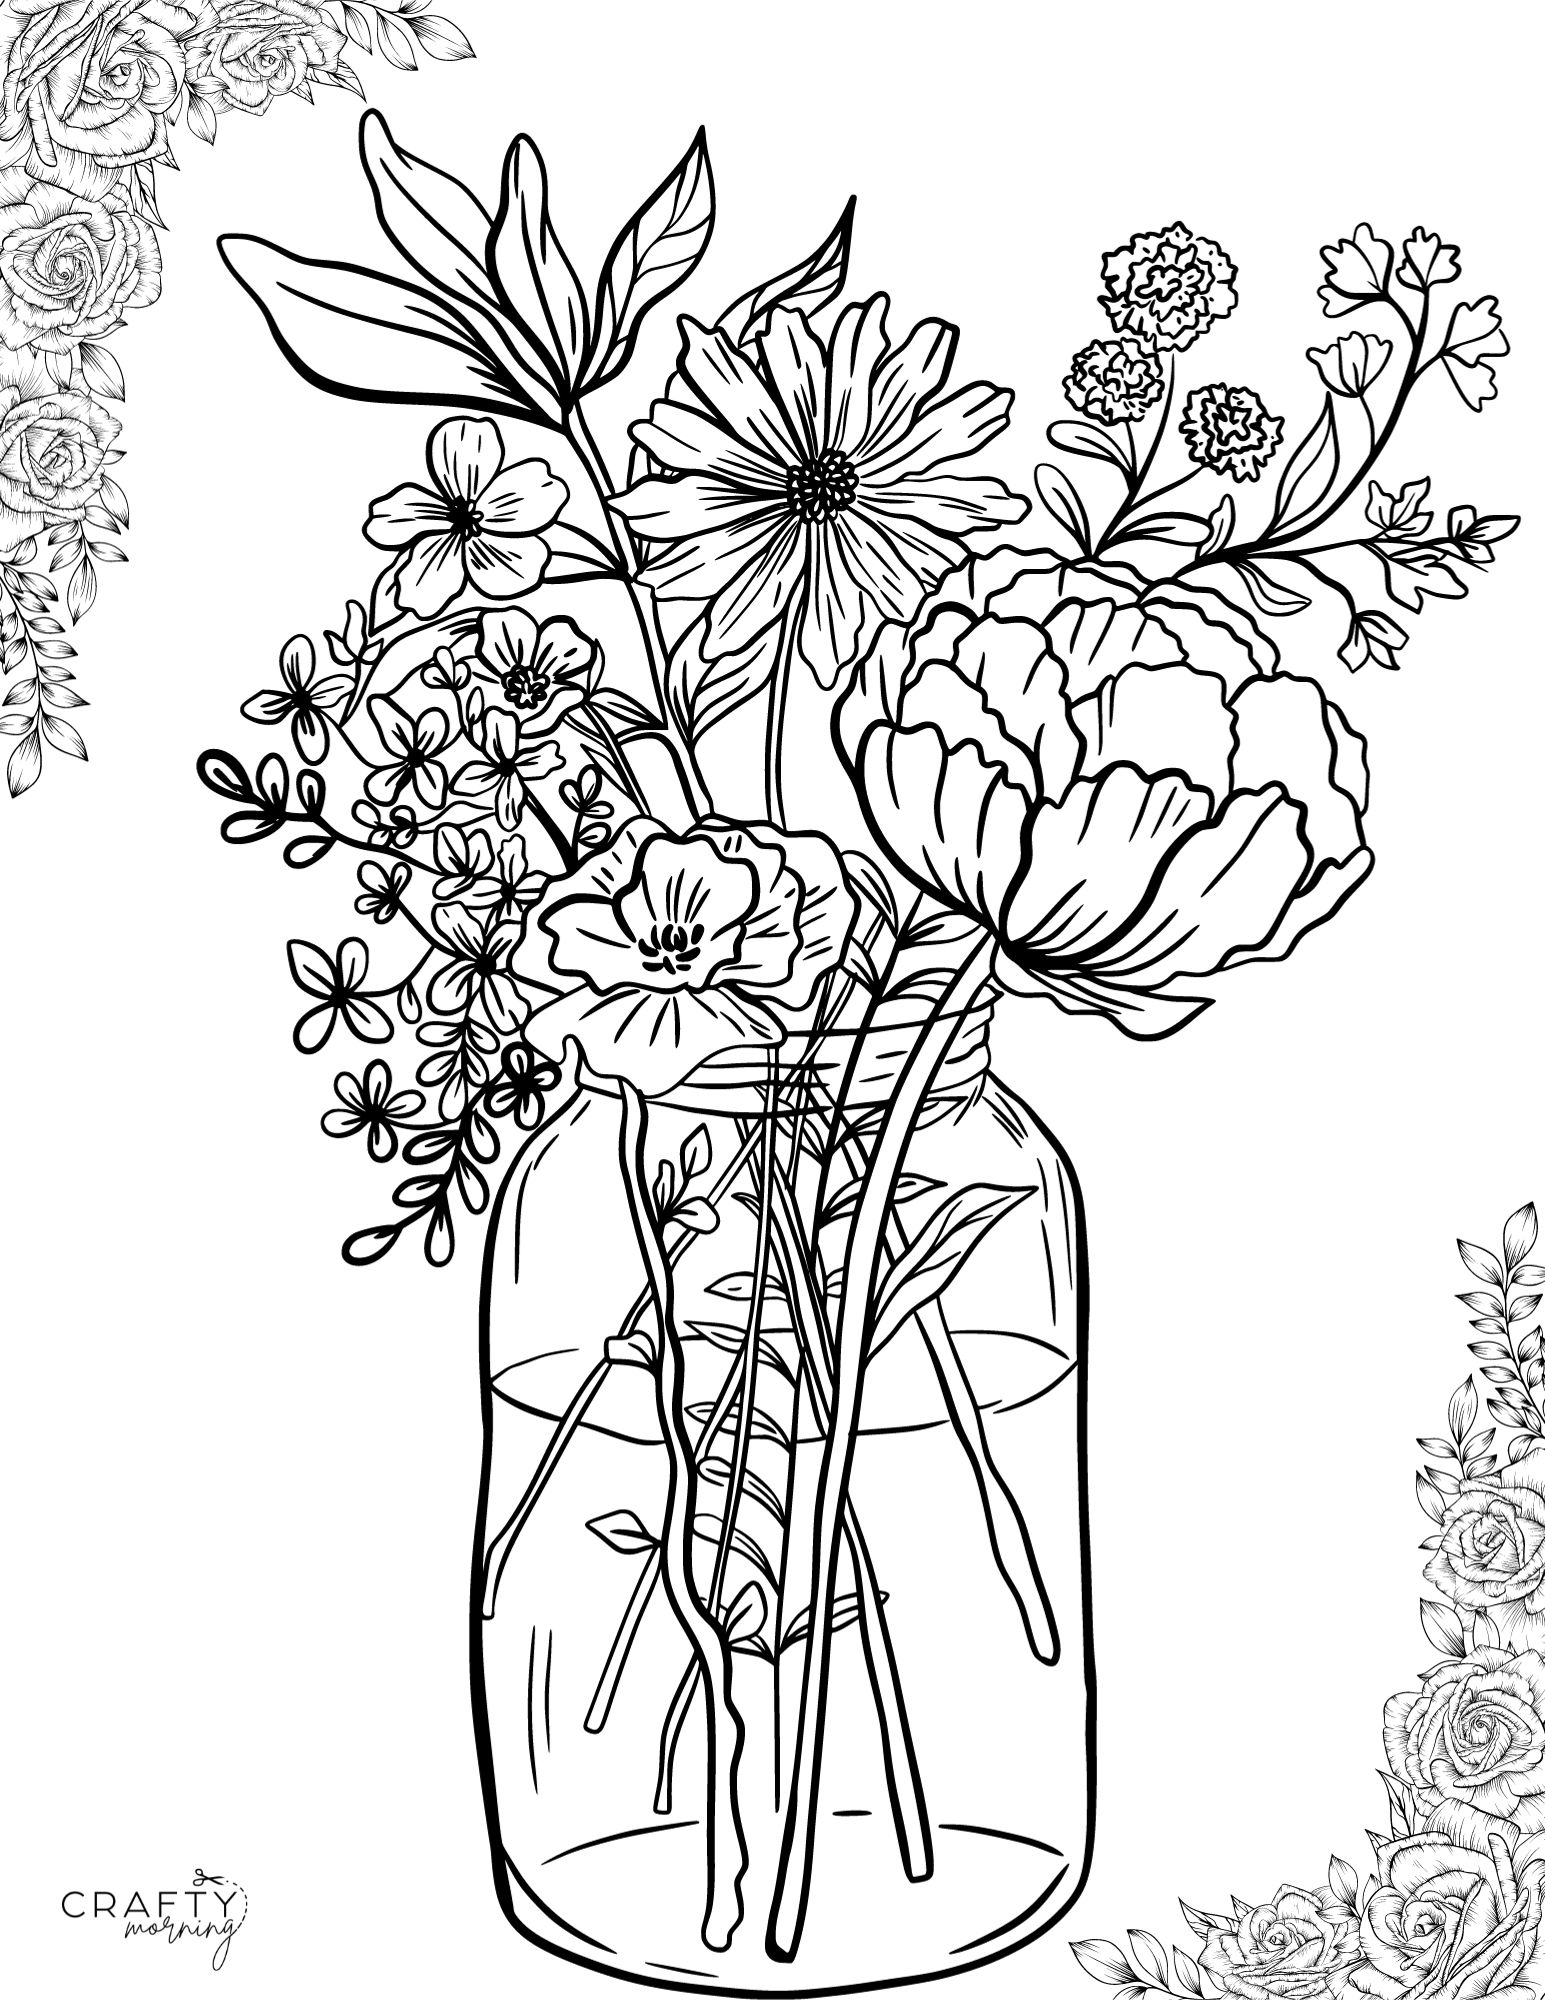 160+ Coloring Page Flowers: Blossom Your Imagination 44